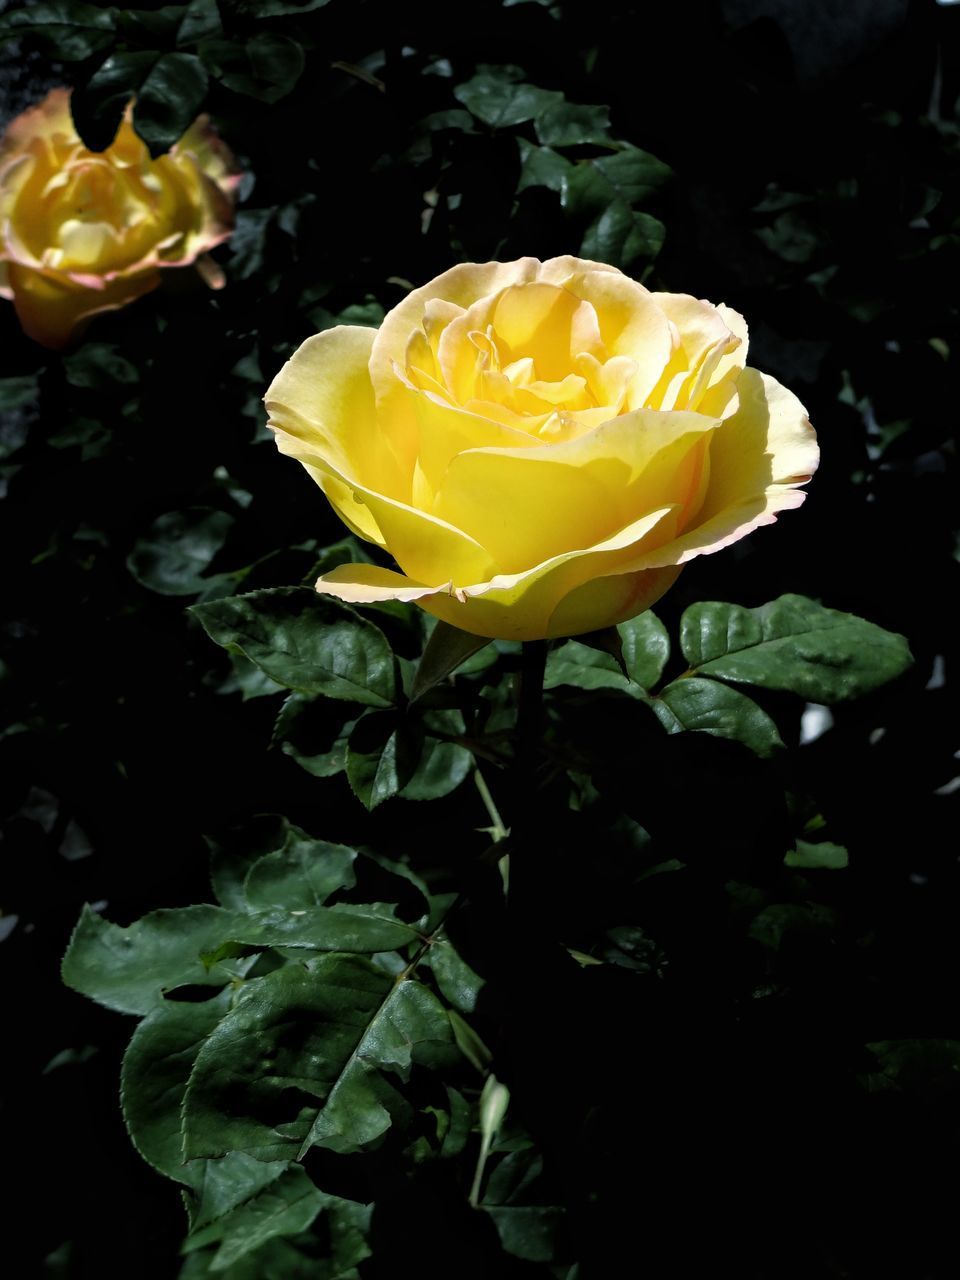 CLOSE-UP OF YELLOW ROSE IN WATER